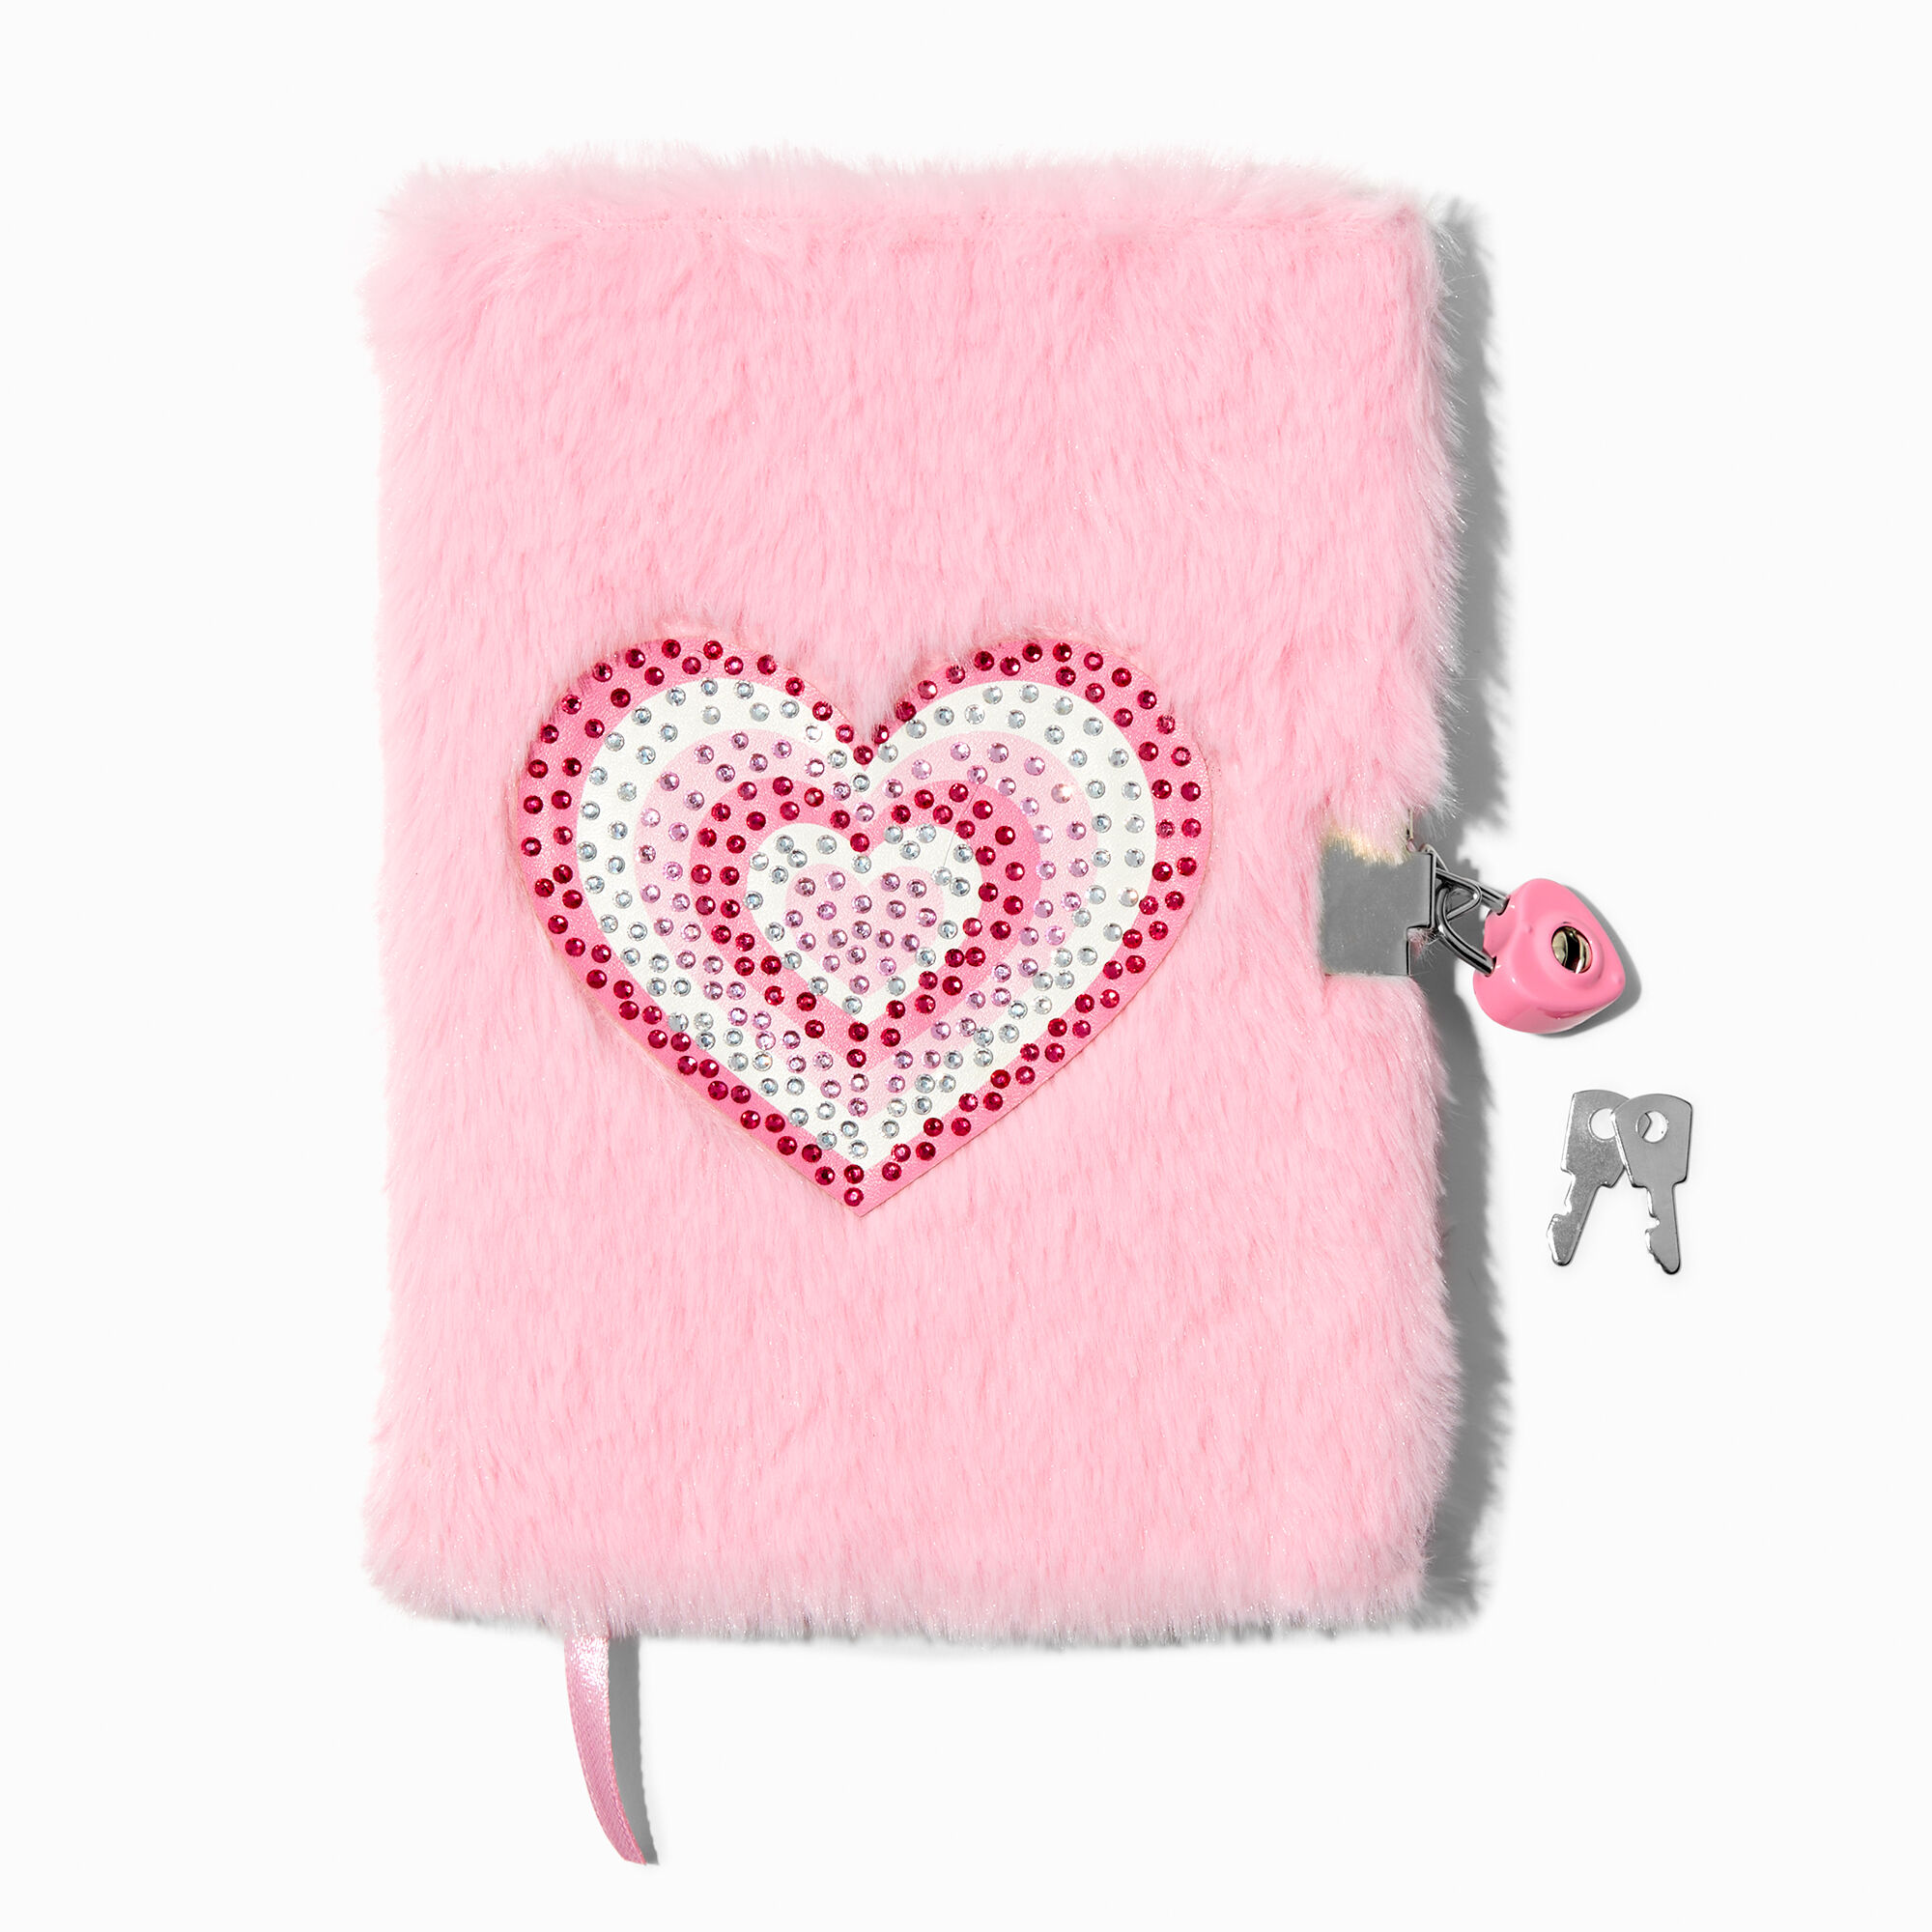 PinkSheep Koala Furry Diary with Lock and Key for Boys Girls, Private Fuzzy  Journal Notebook for Kids